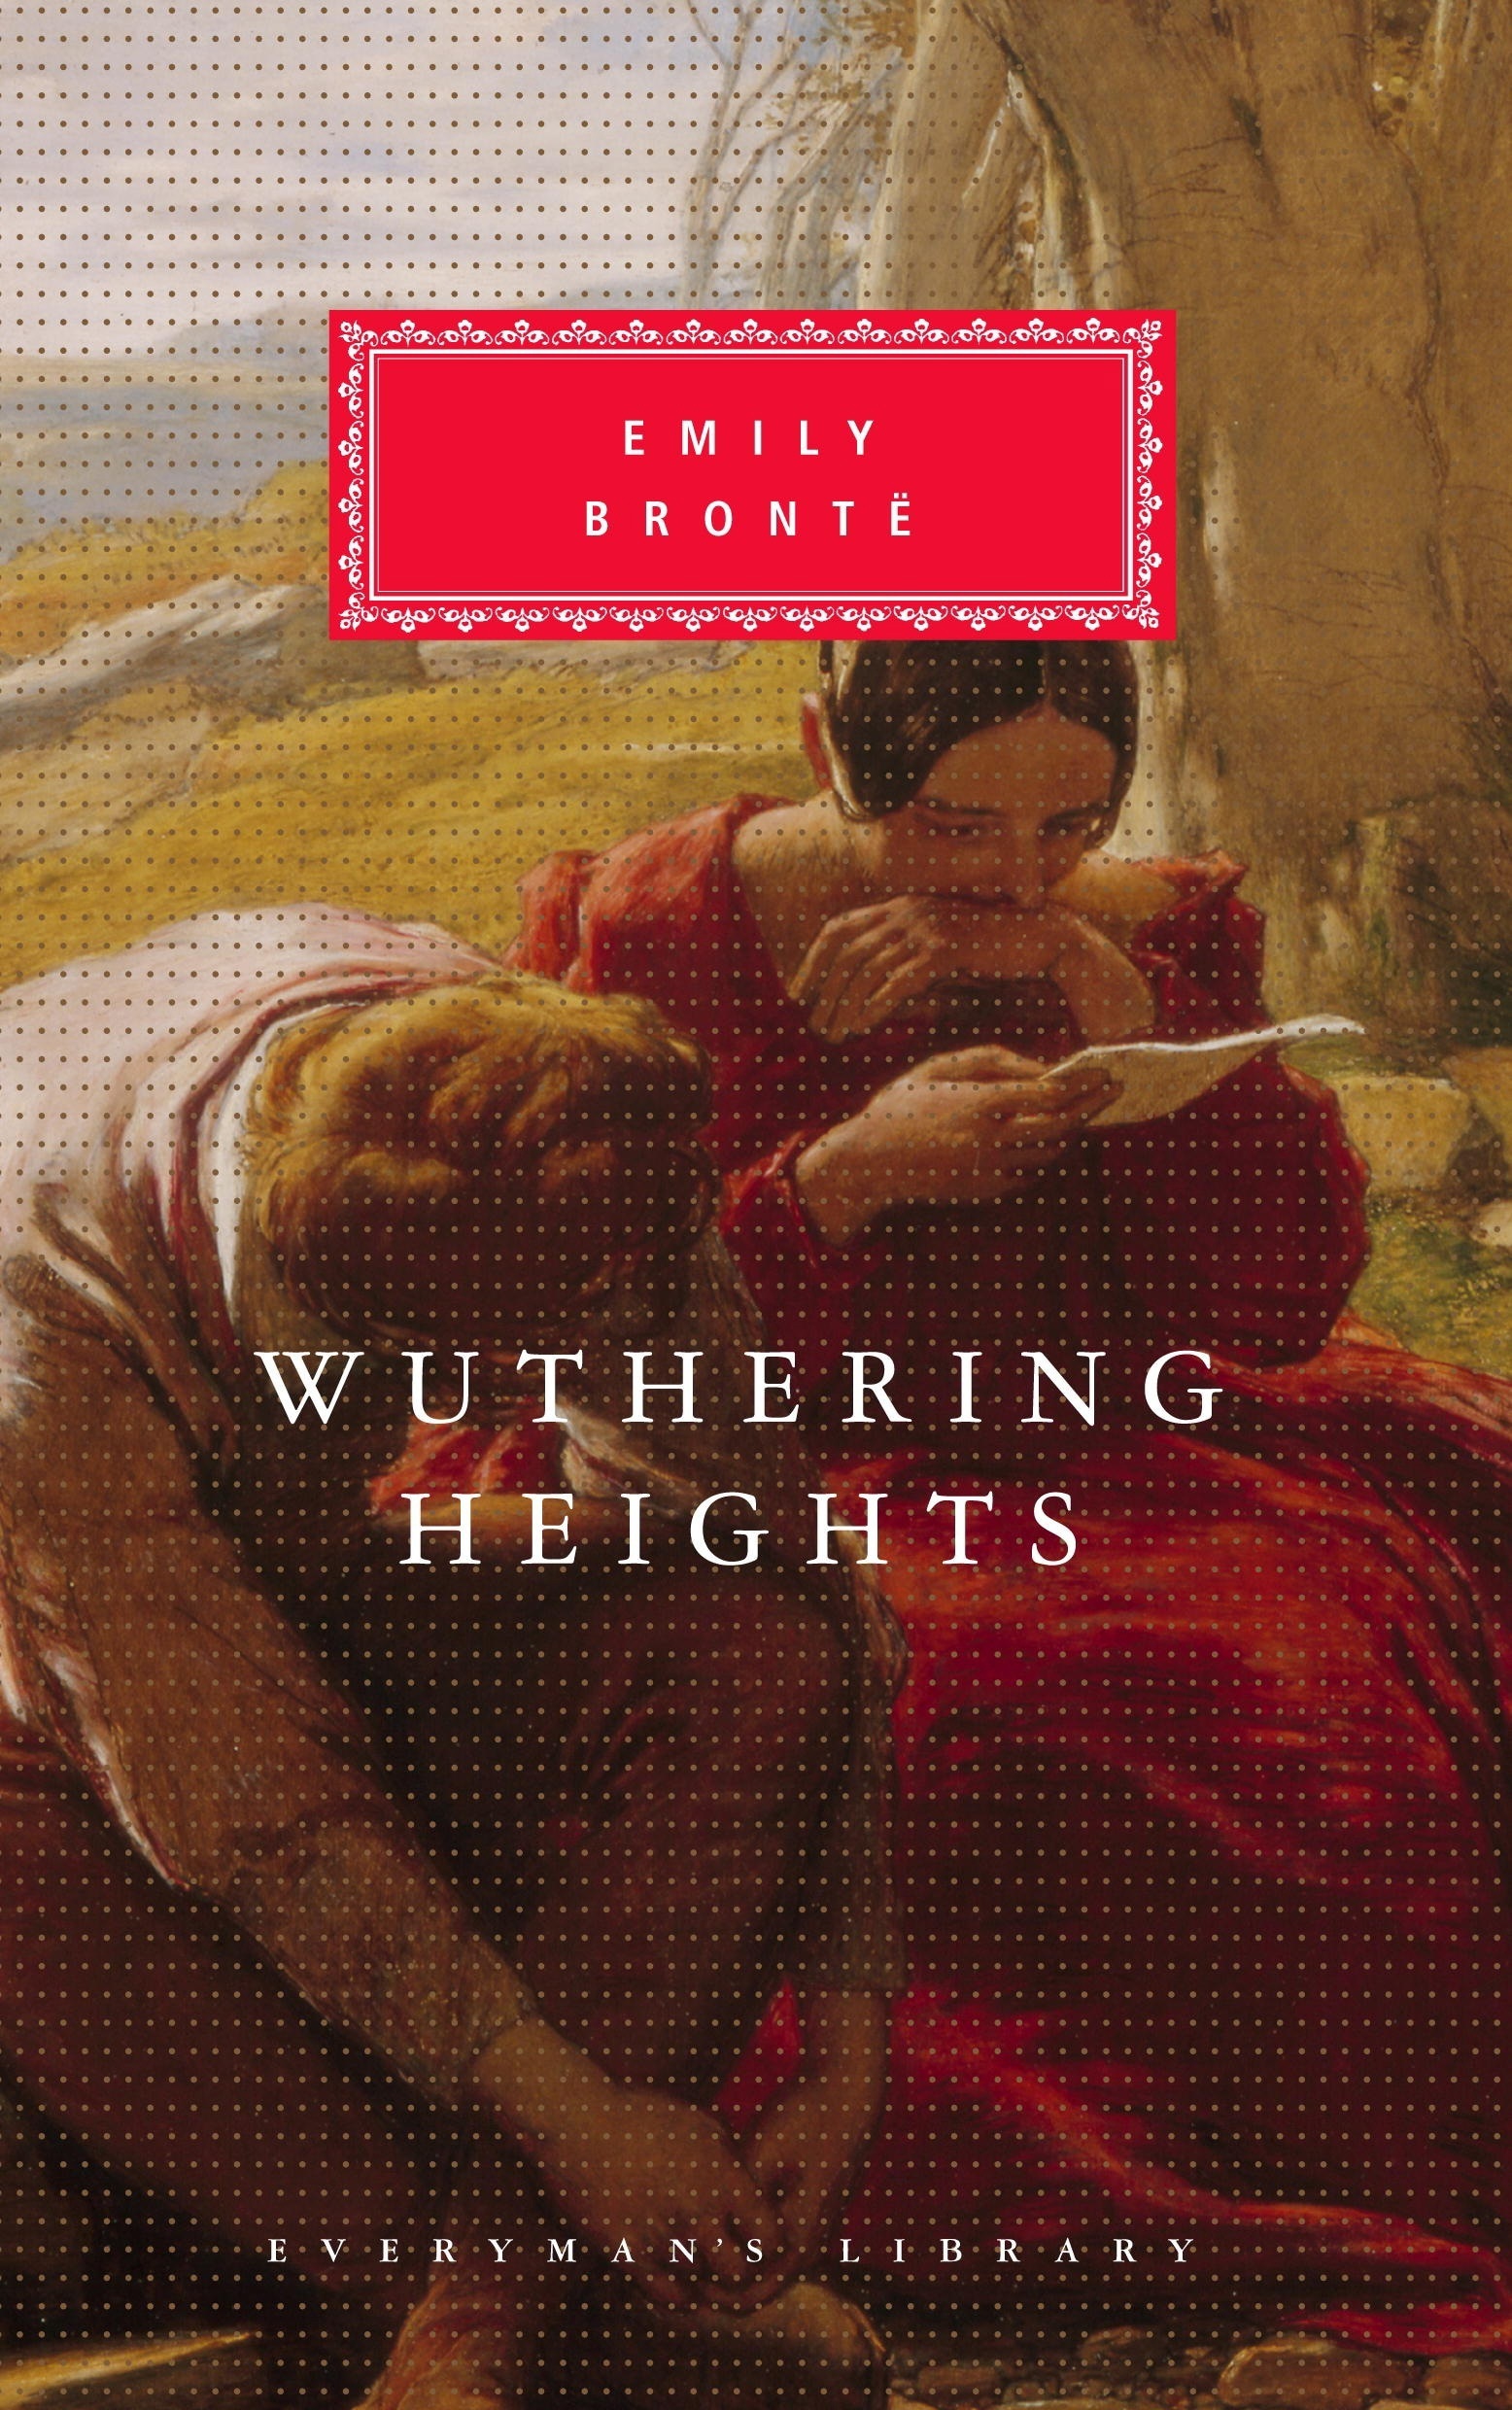 Book “Wuthering Heights” by Emily Brontë — September 26, 1991